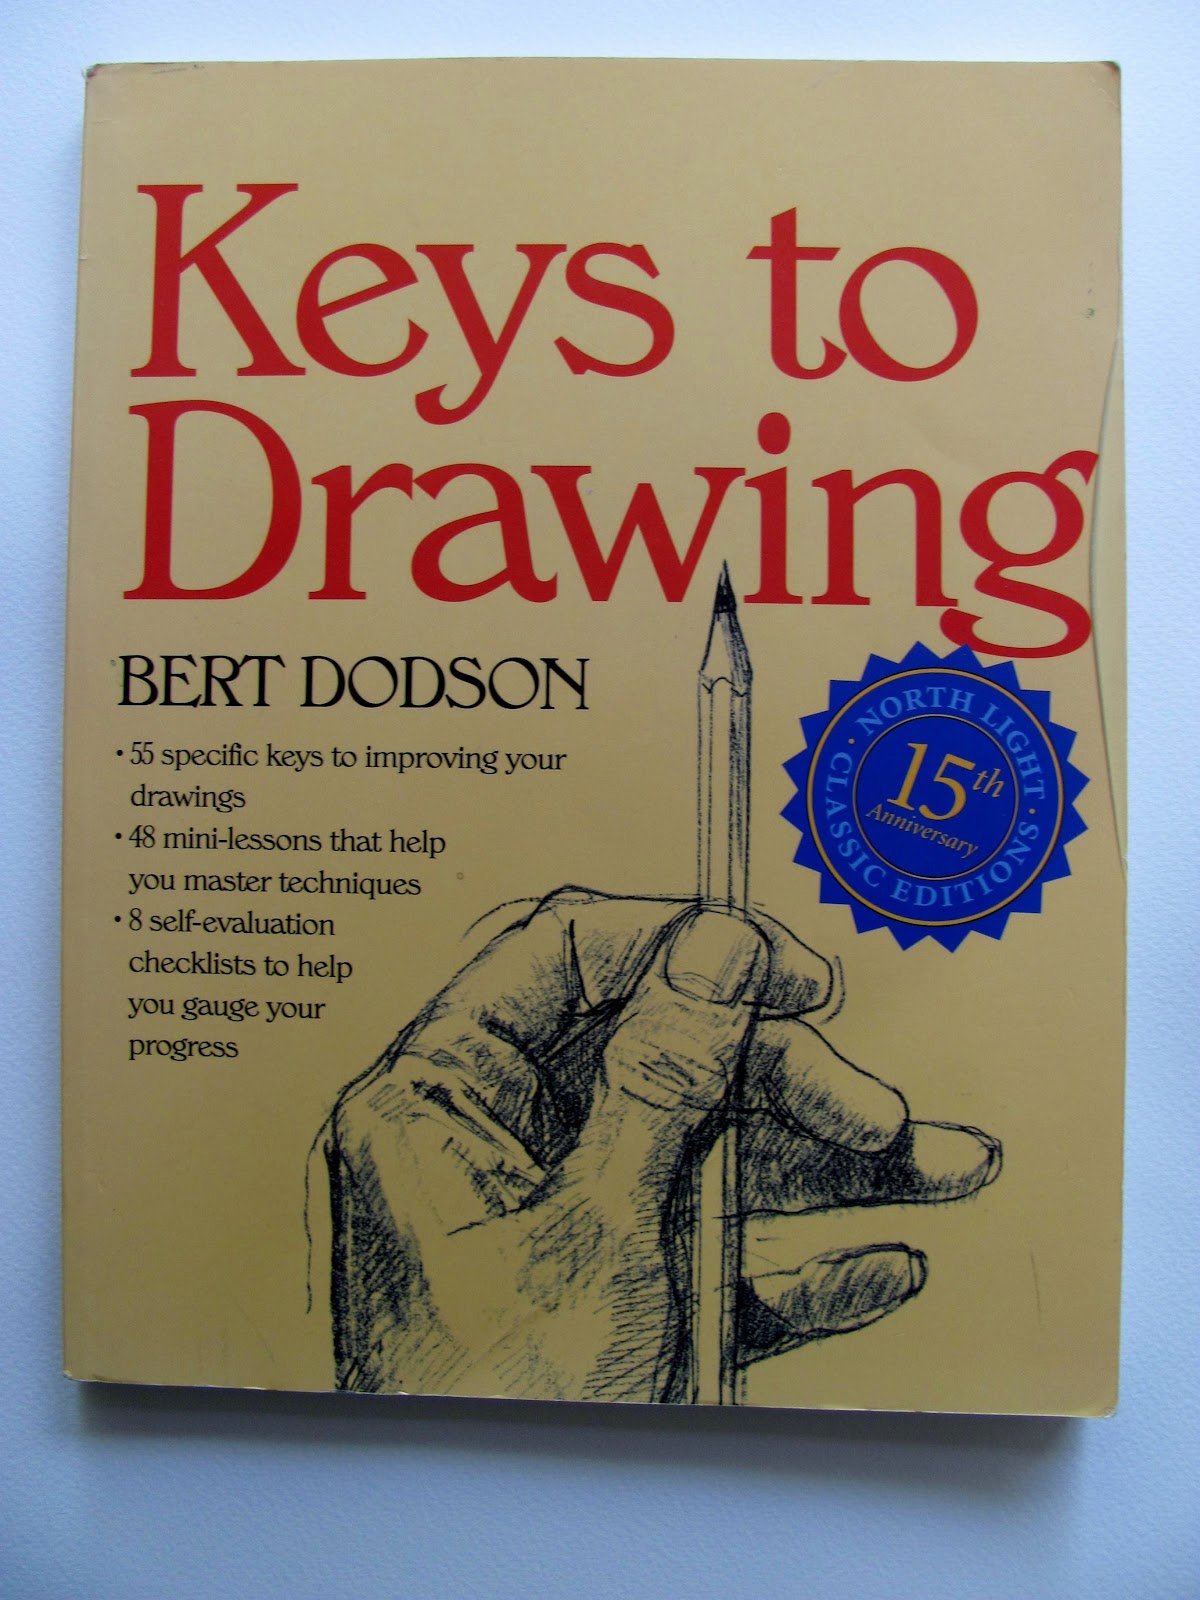 The Watercolour Log: Book Review - Keys to Drawing by Bert Dodson